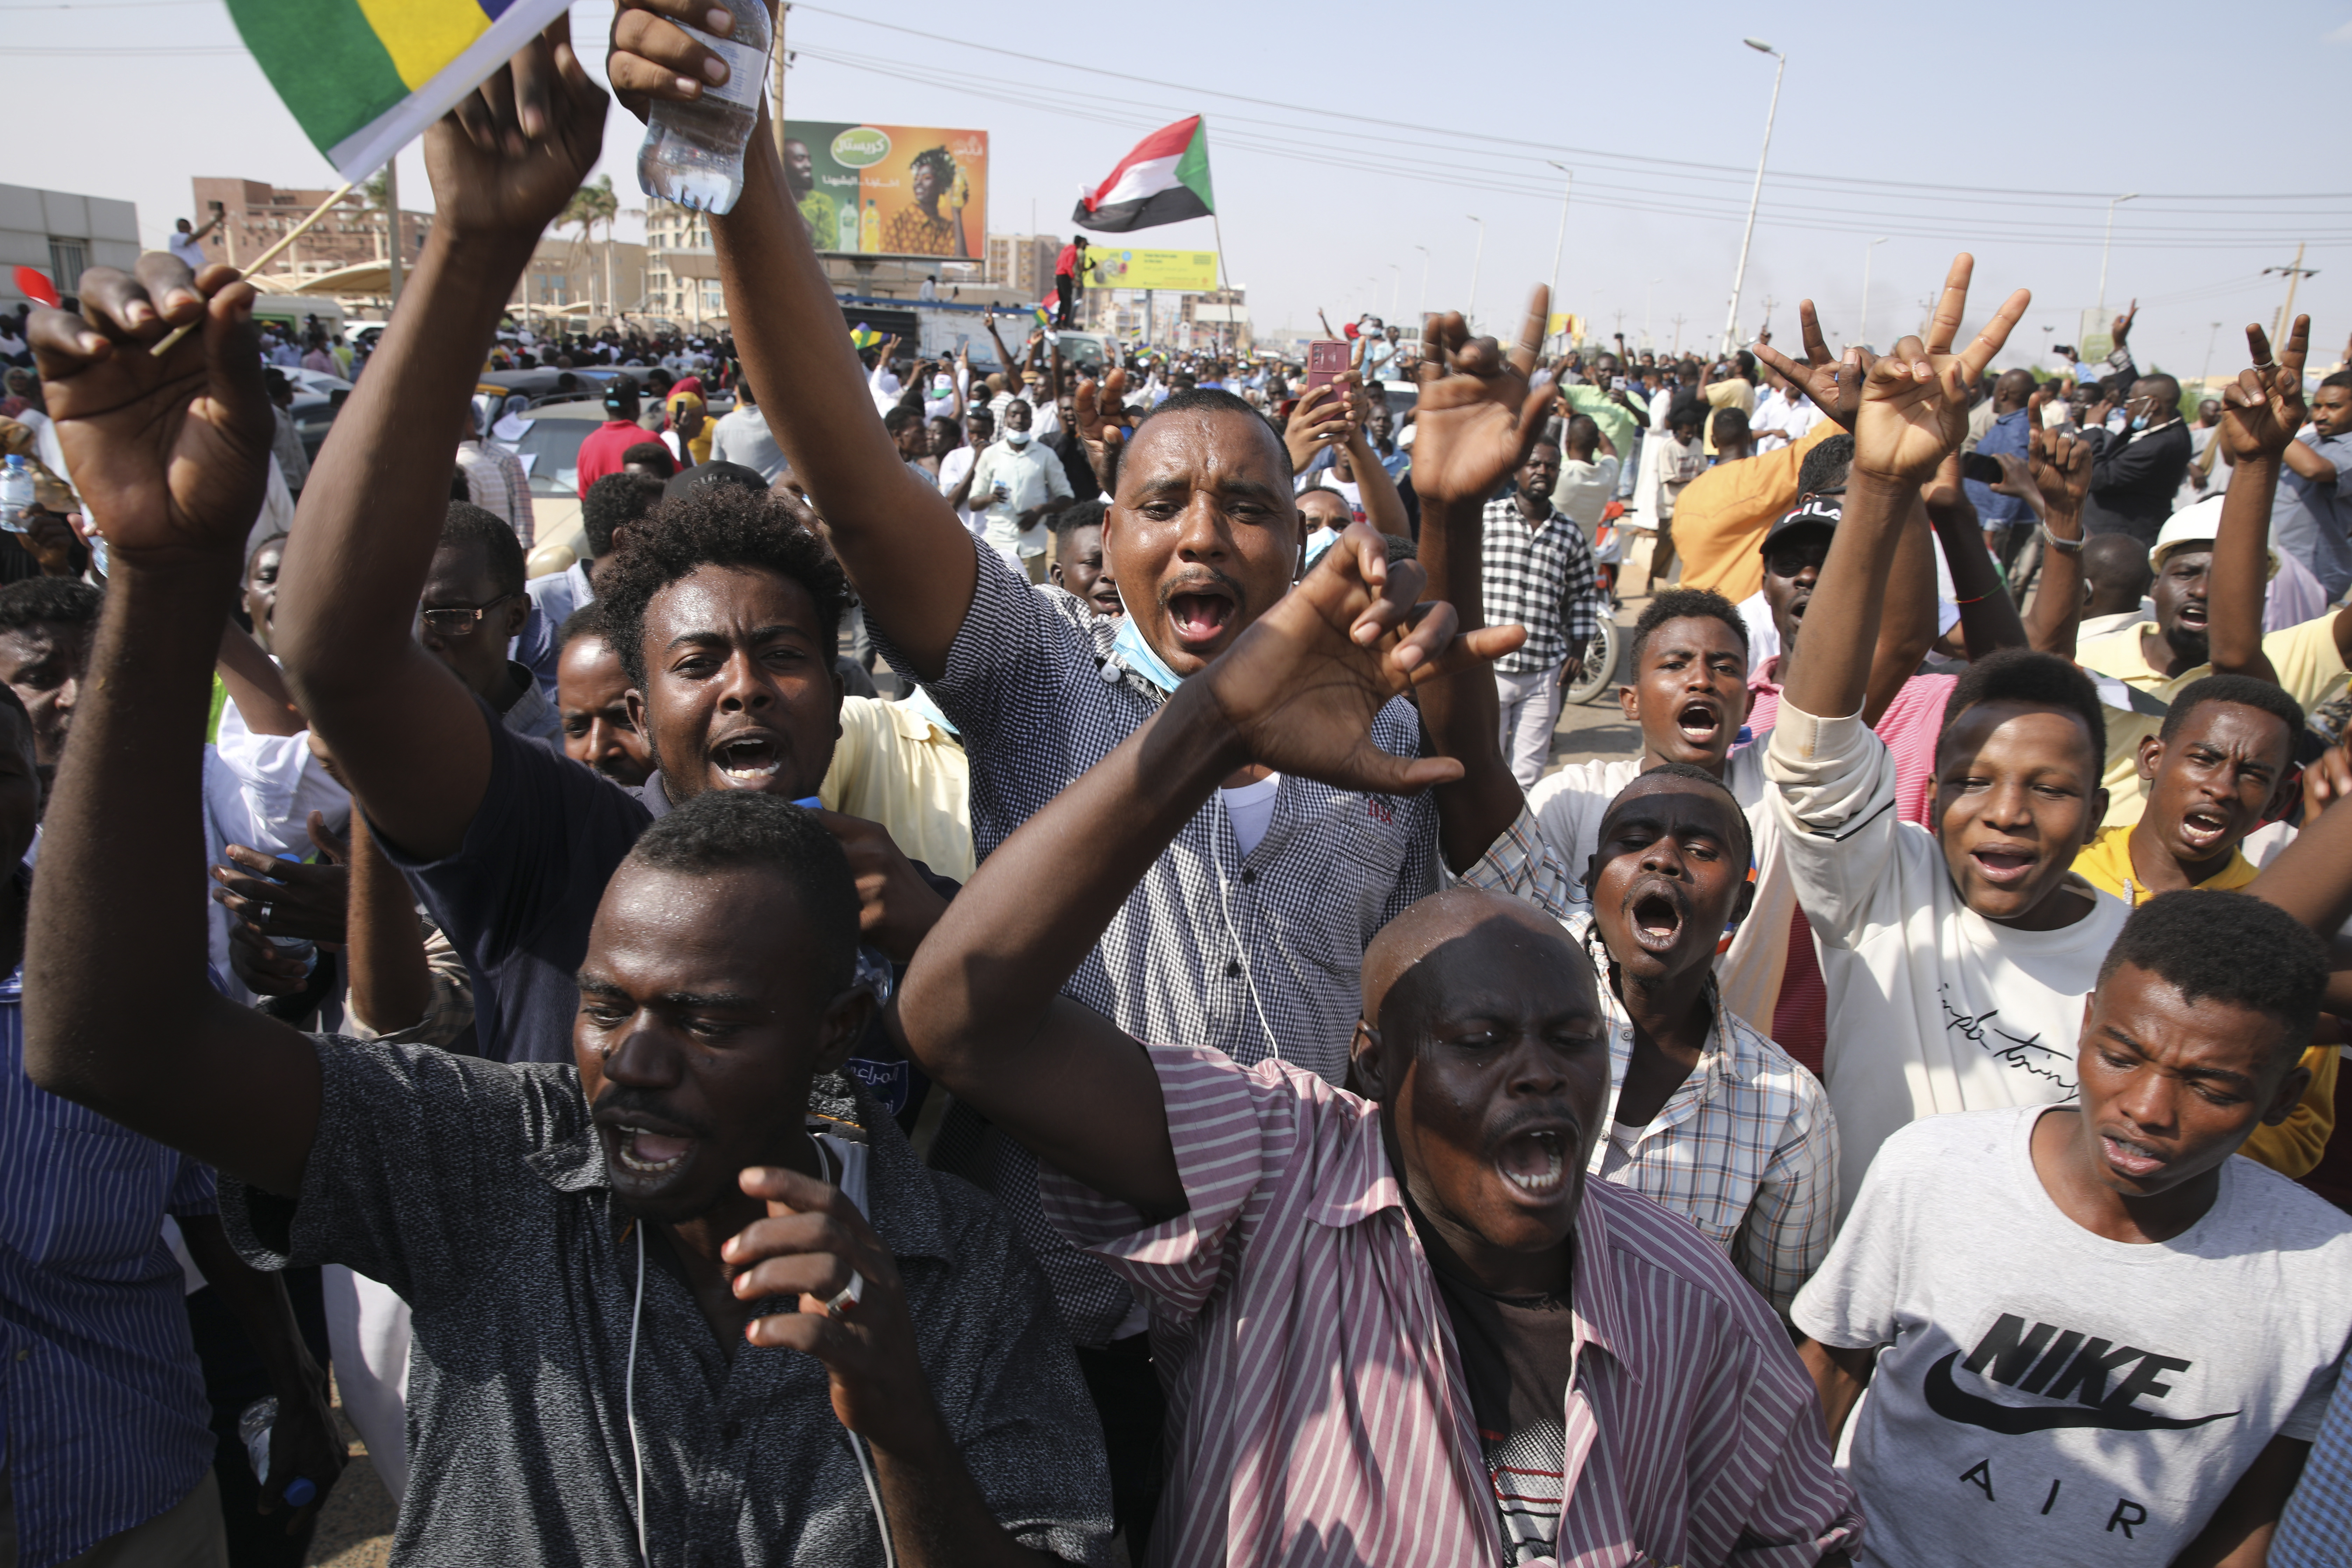 The relationship between military generals and Sudanese pro-democracy groups has deteriorated in recent weeks over the country's future.